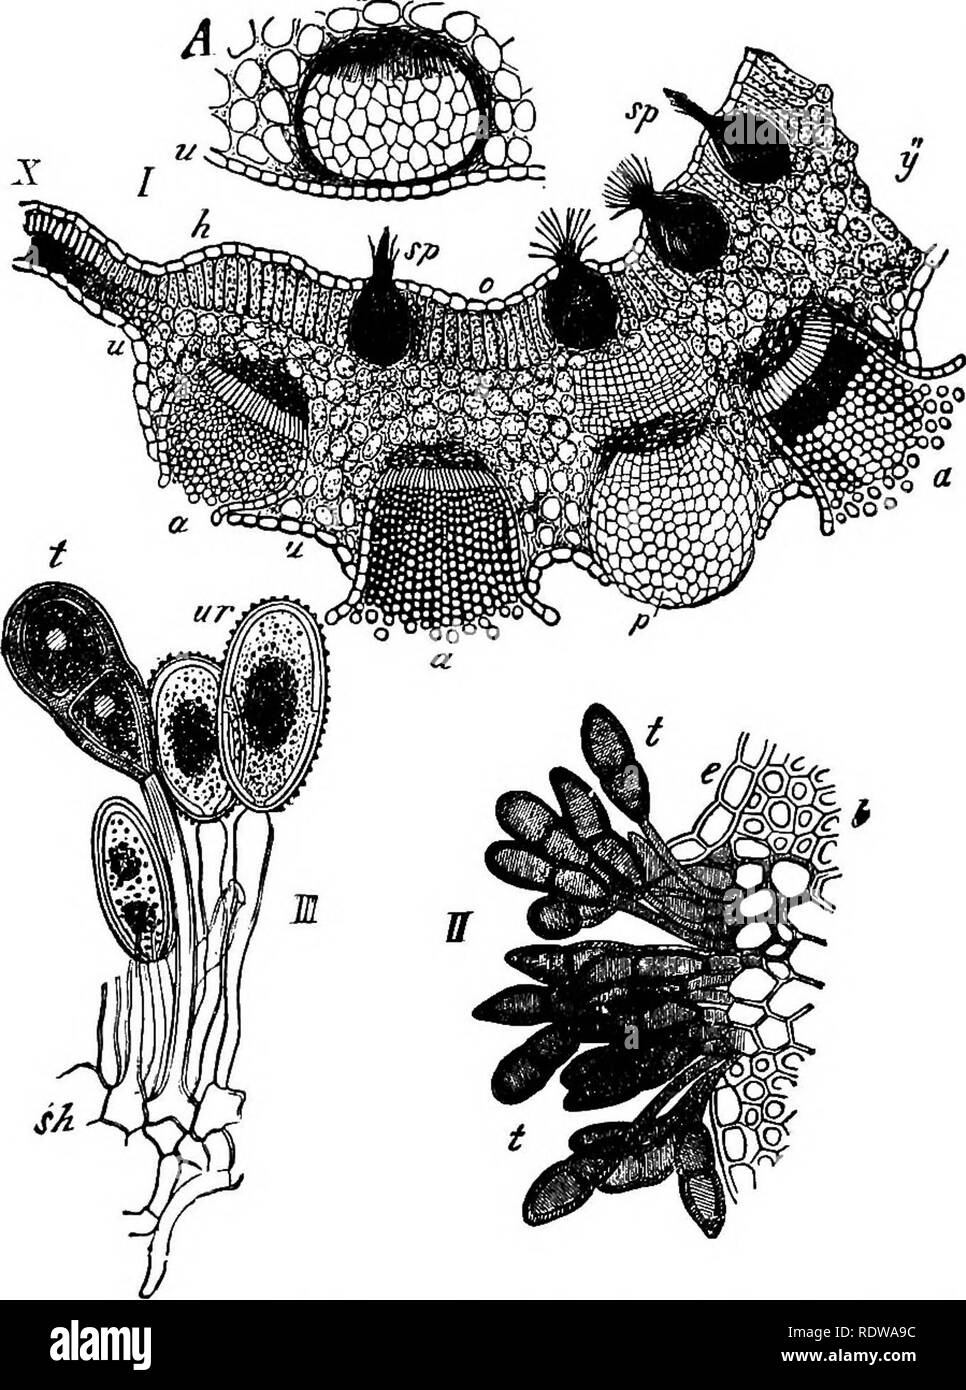 . Botany for high schools and colleges. Botany. UBEDINE^. 311 hyplige, which penetrate between the cells, causing the leaves to become usually much thickened and distorted in those parts which are infested with the parasitic growths. Oc-. Fig. 216,—Several stages of Puccinia grandnis. A. part of a vertical section of a. leaf of the Barberry {Berberis vulgaris), with a young unopened aecidinm fruit; w, epidermis. J., section of a Barberry leaf, natural thickness at X, greatly tiiickened from h toward y; w, epidermis of the under surface ; o, of the upper surface ; », unopened tecidium fruit; a, Stock Photo